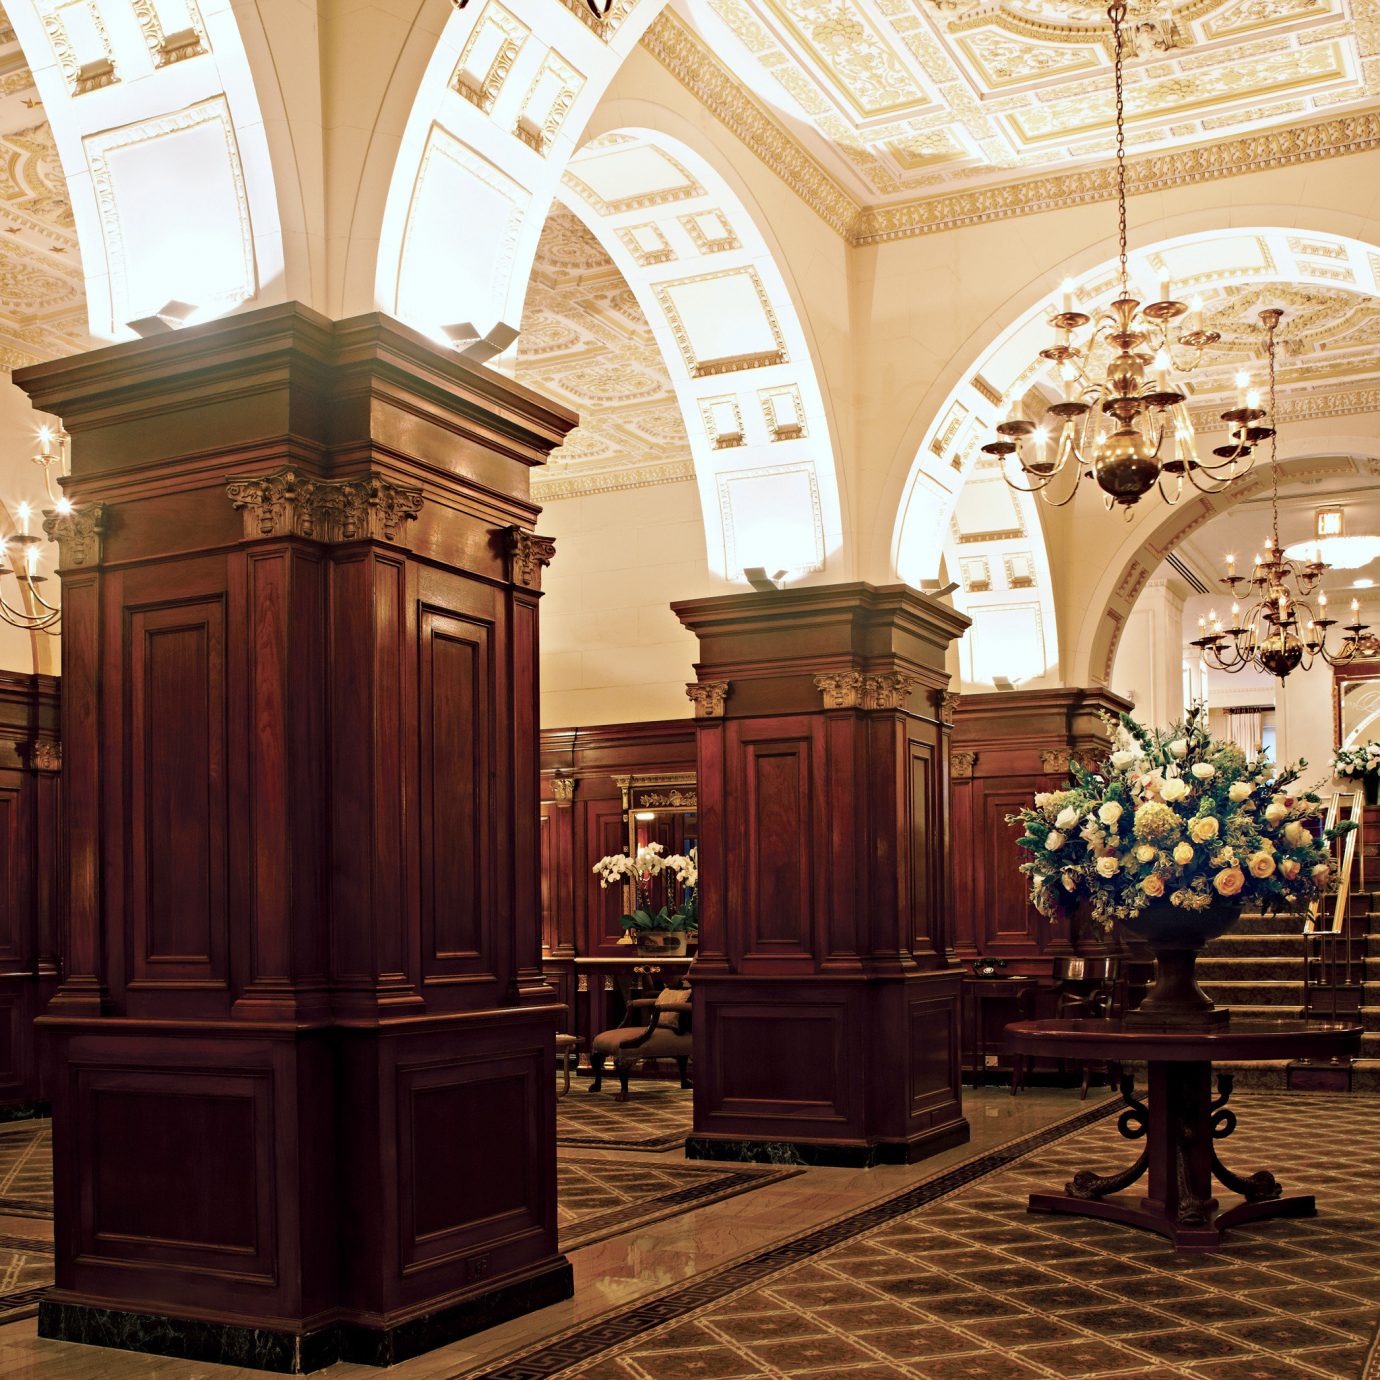 Lobby Lounge chapel Church place of worship synagogue hall ballroom colonnade